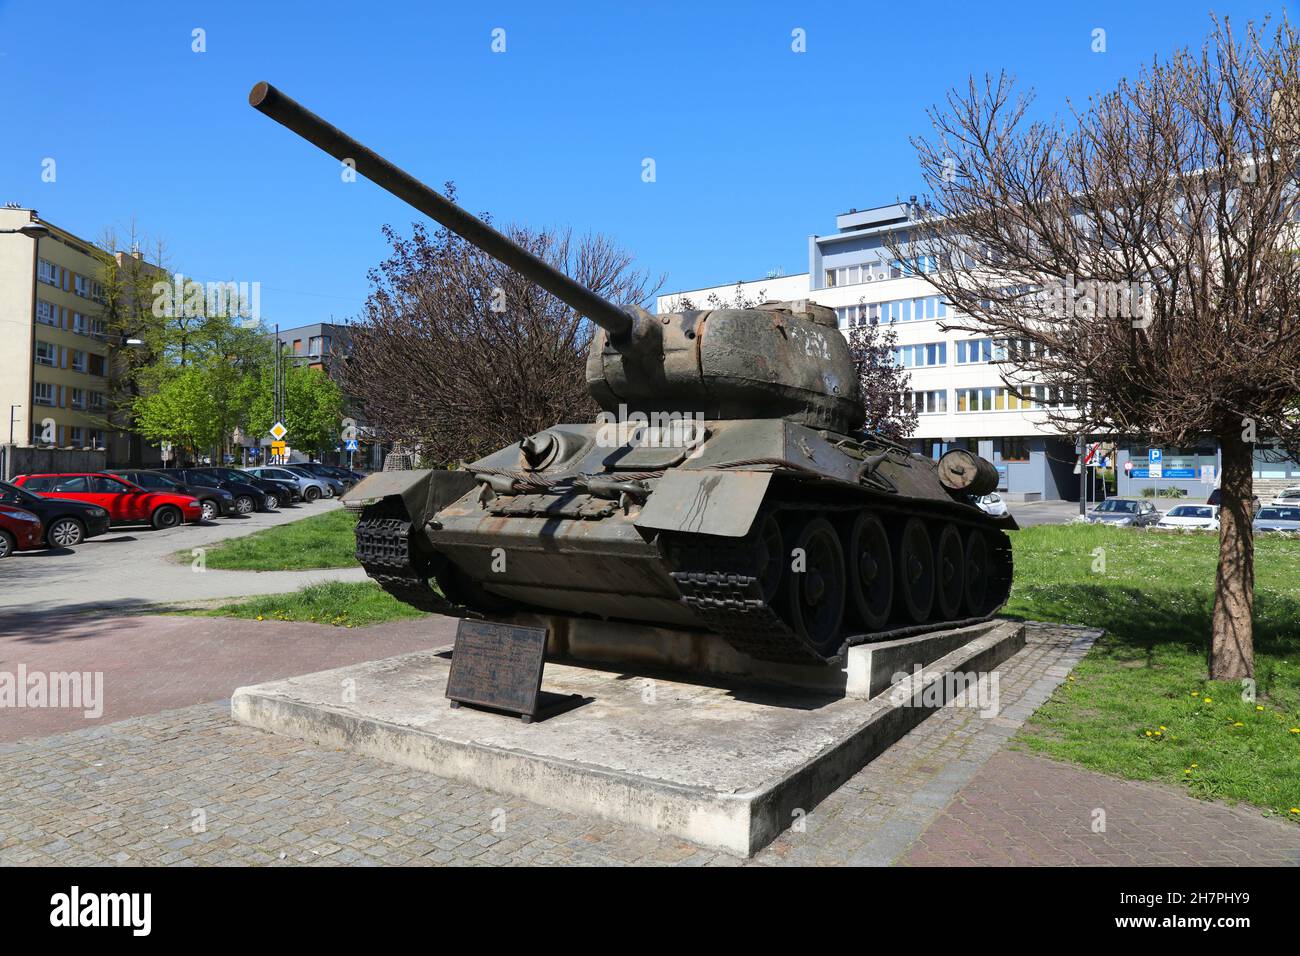 GLIWICE, POLAND - MAY 11, 2021: Historic T-34 tank monument in Gliwice city in Poland, one of largest cities of Upper Silesian metropolitan area. Stock Photo